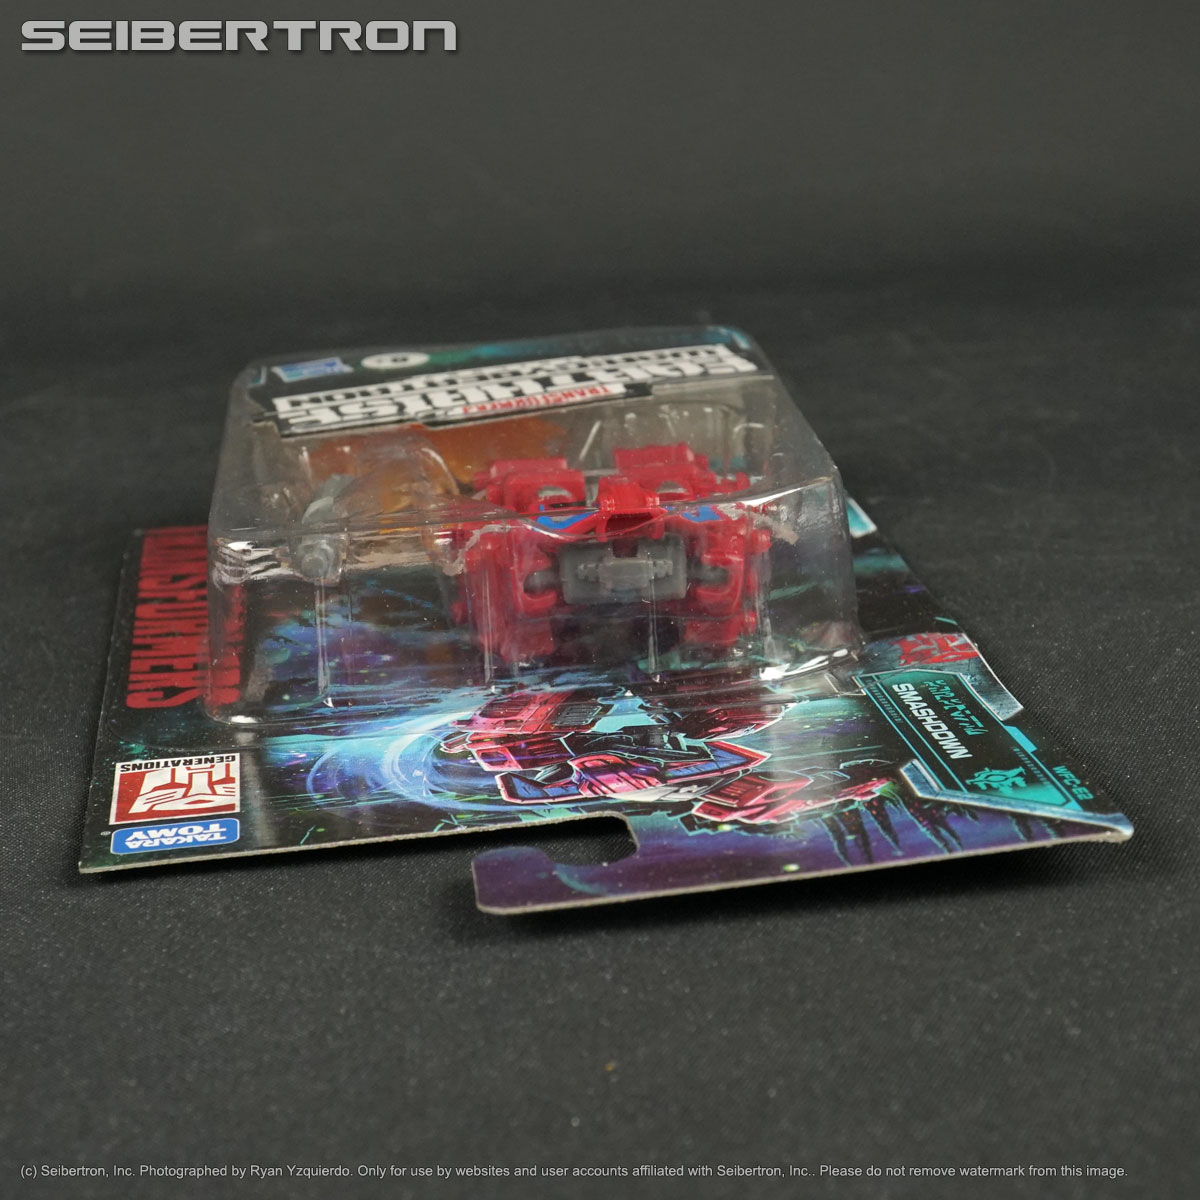 Transformers, Comic Books, Masters of the Universe, Teenage Mutant Ninja Turtles, Gobots, BotBots, Shopkins, and other listings from Seibertron.com: WFC-E2 SMASHDOWN Transformers War for Cybertron Earthrise Battle Master Hasbro 2020 New